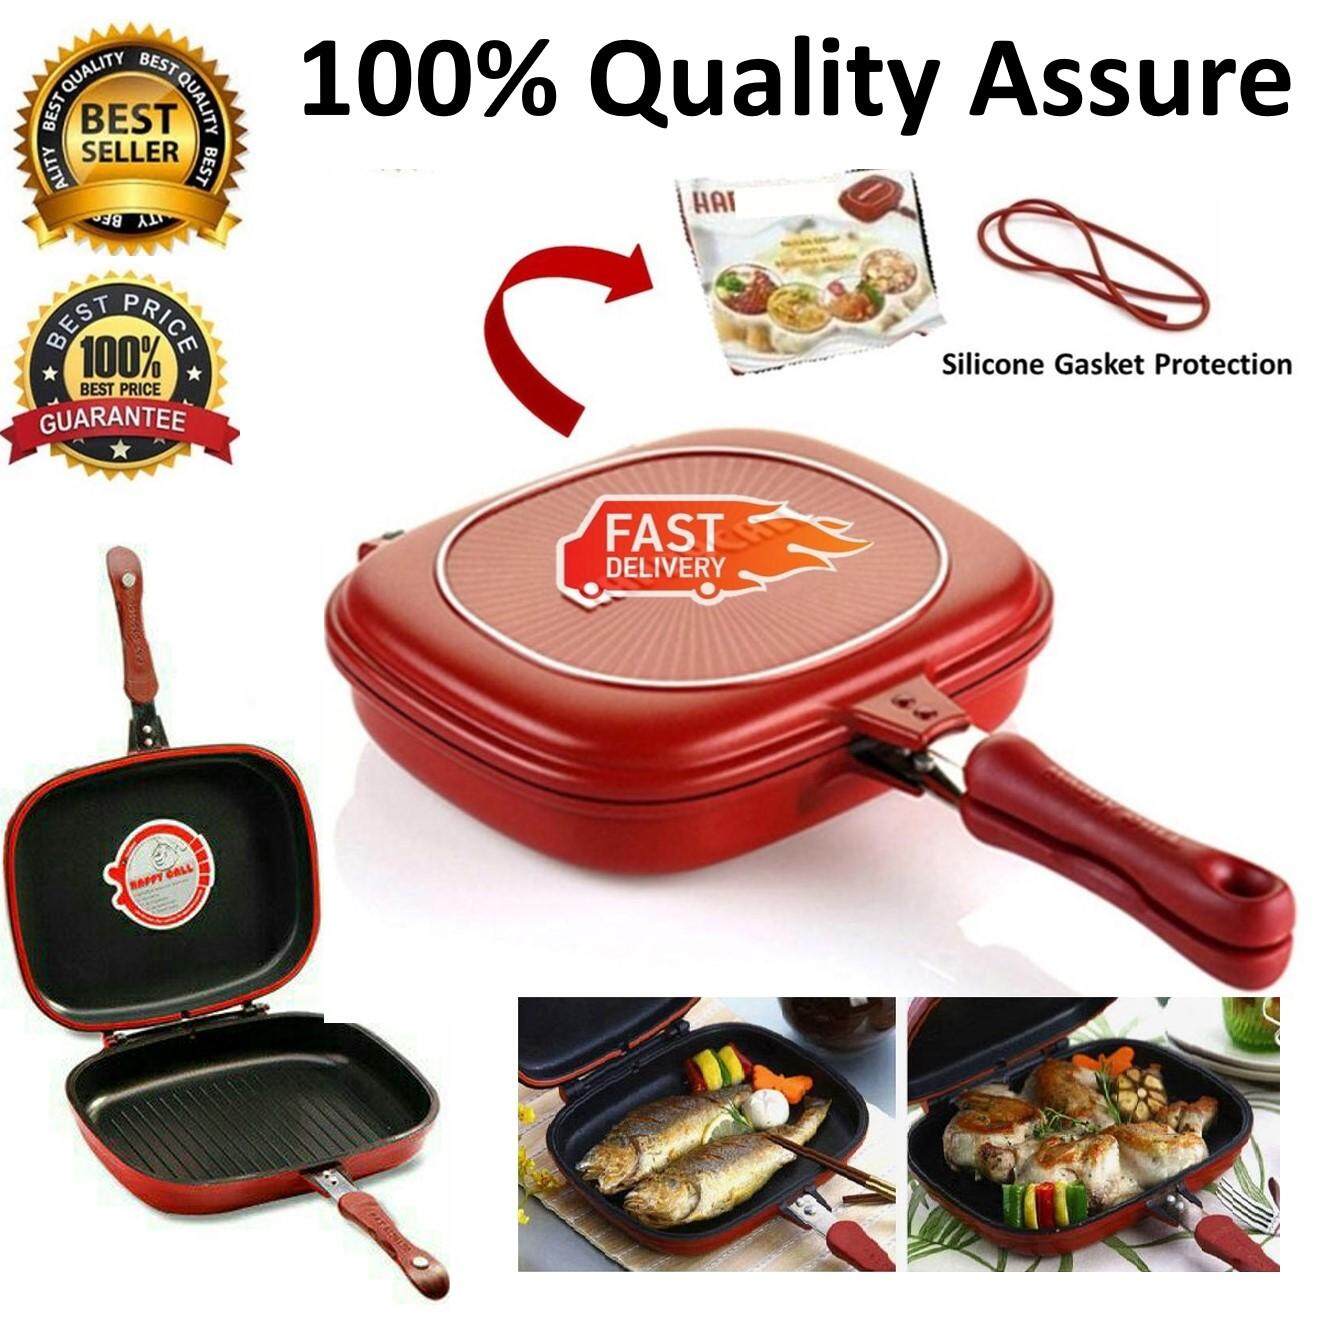 [Made in Korea] 32cm Double-Sided Foldable Frying Non-Stick Grill Pressure Pan + Double Pan Silicone Gasket Protection + Recipe book